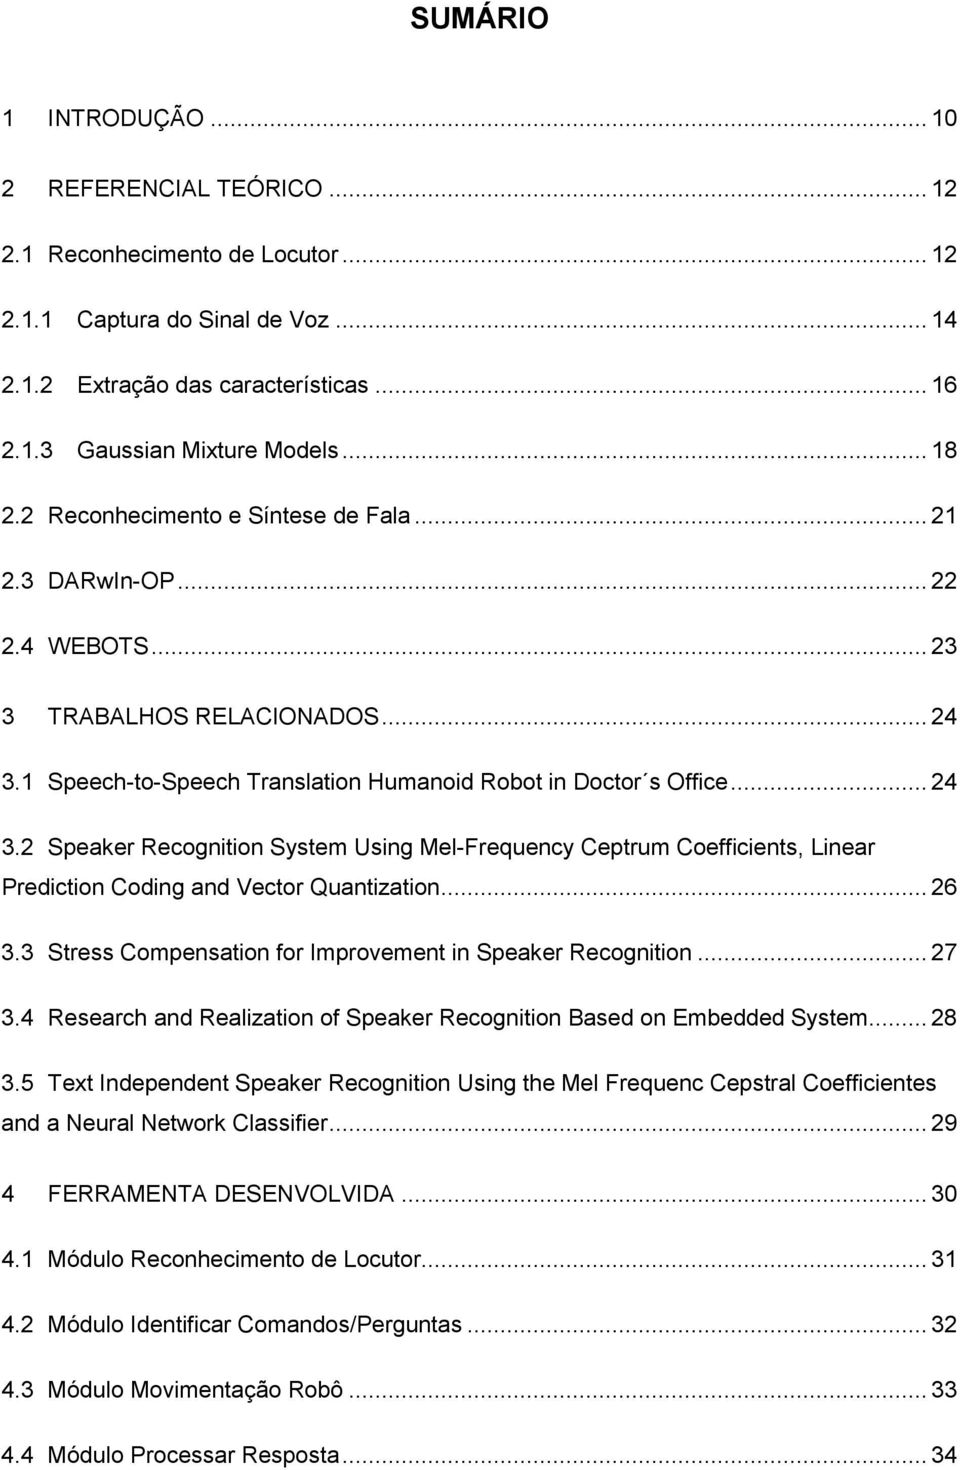 1 Speech-to-Speech Translation Humanoid Robot in Doctor s Office... 24 3.2 Speaker Recognition System Using Mel-Frequency Ceptrum Coefficients, Linear Prediction Coding and Vector Quantization... 26 3.